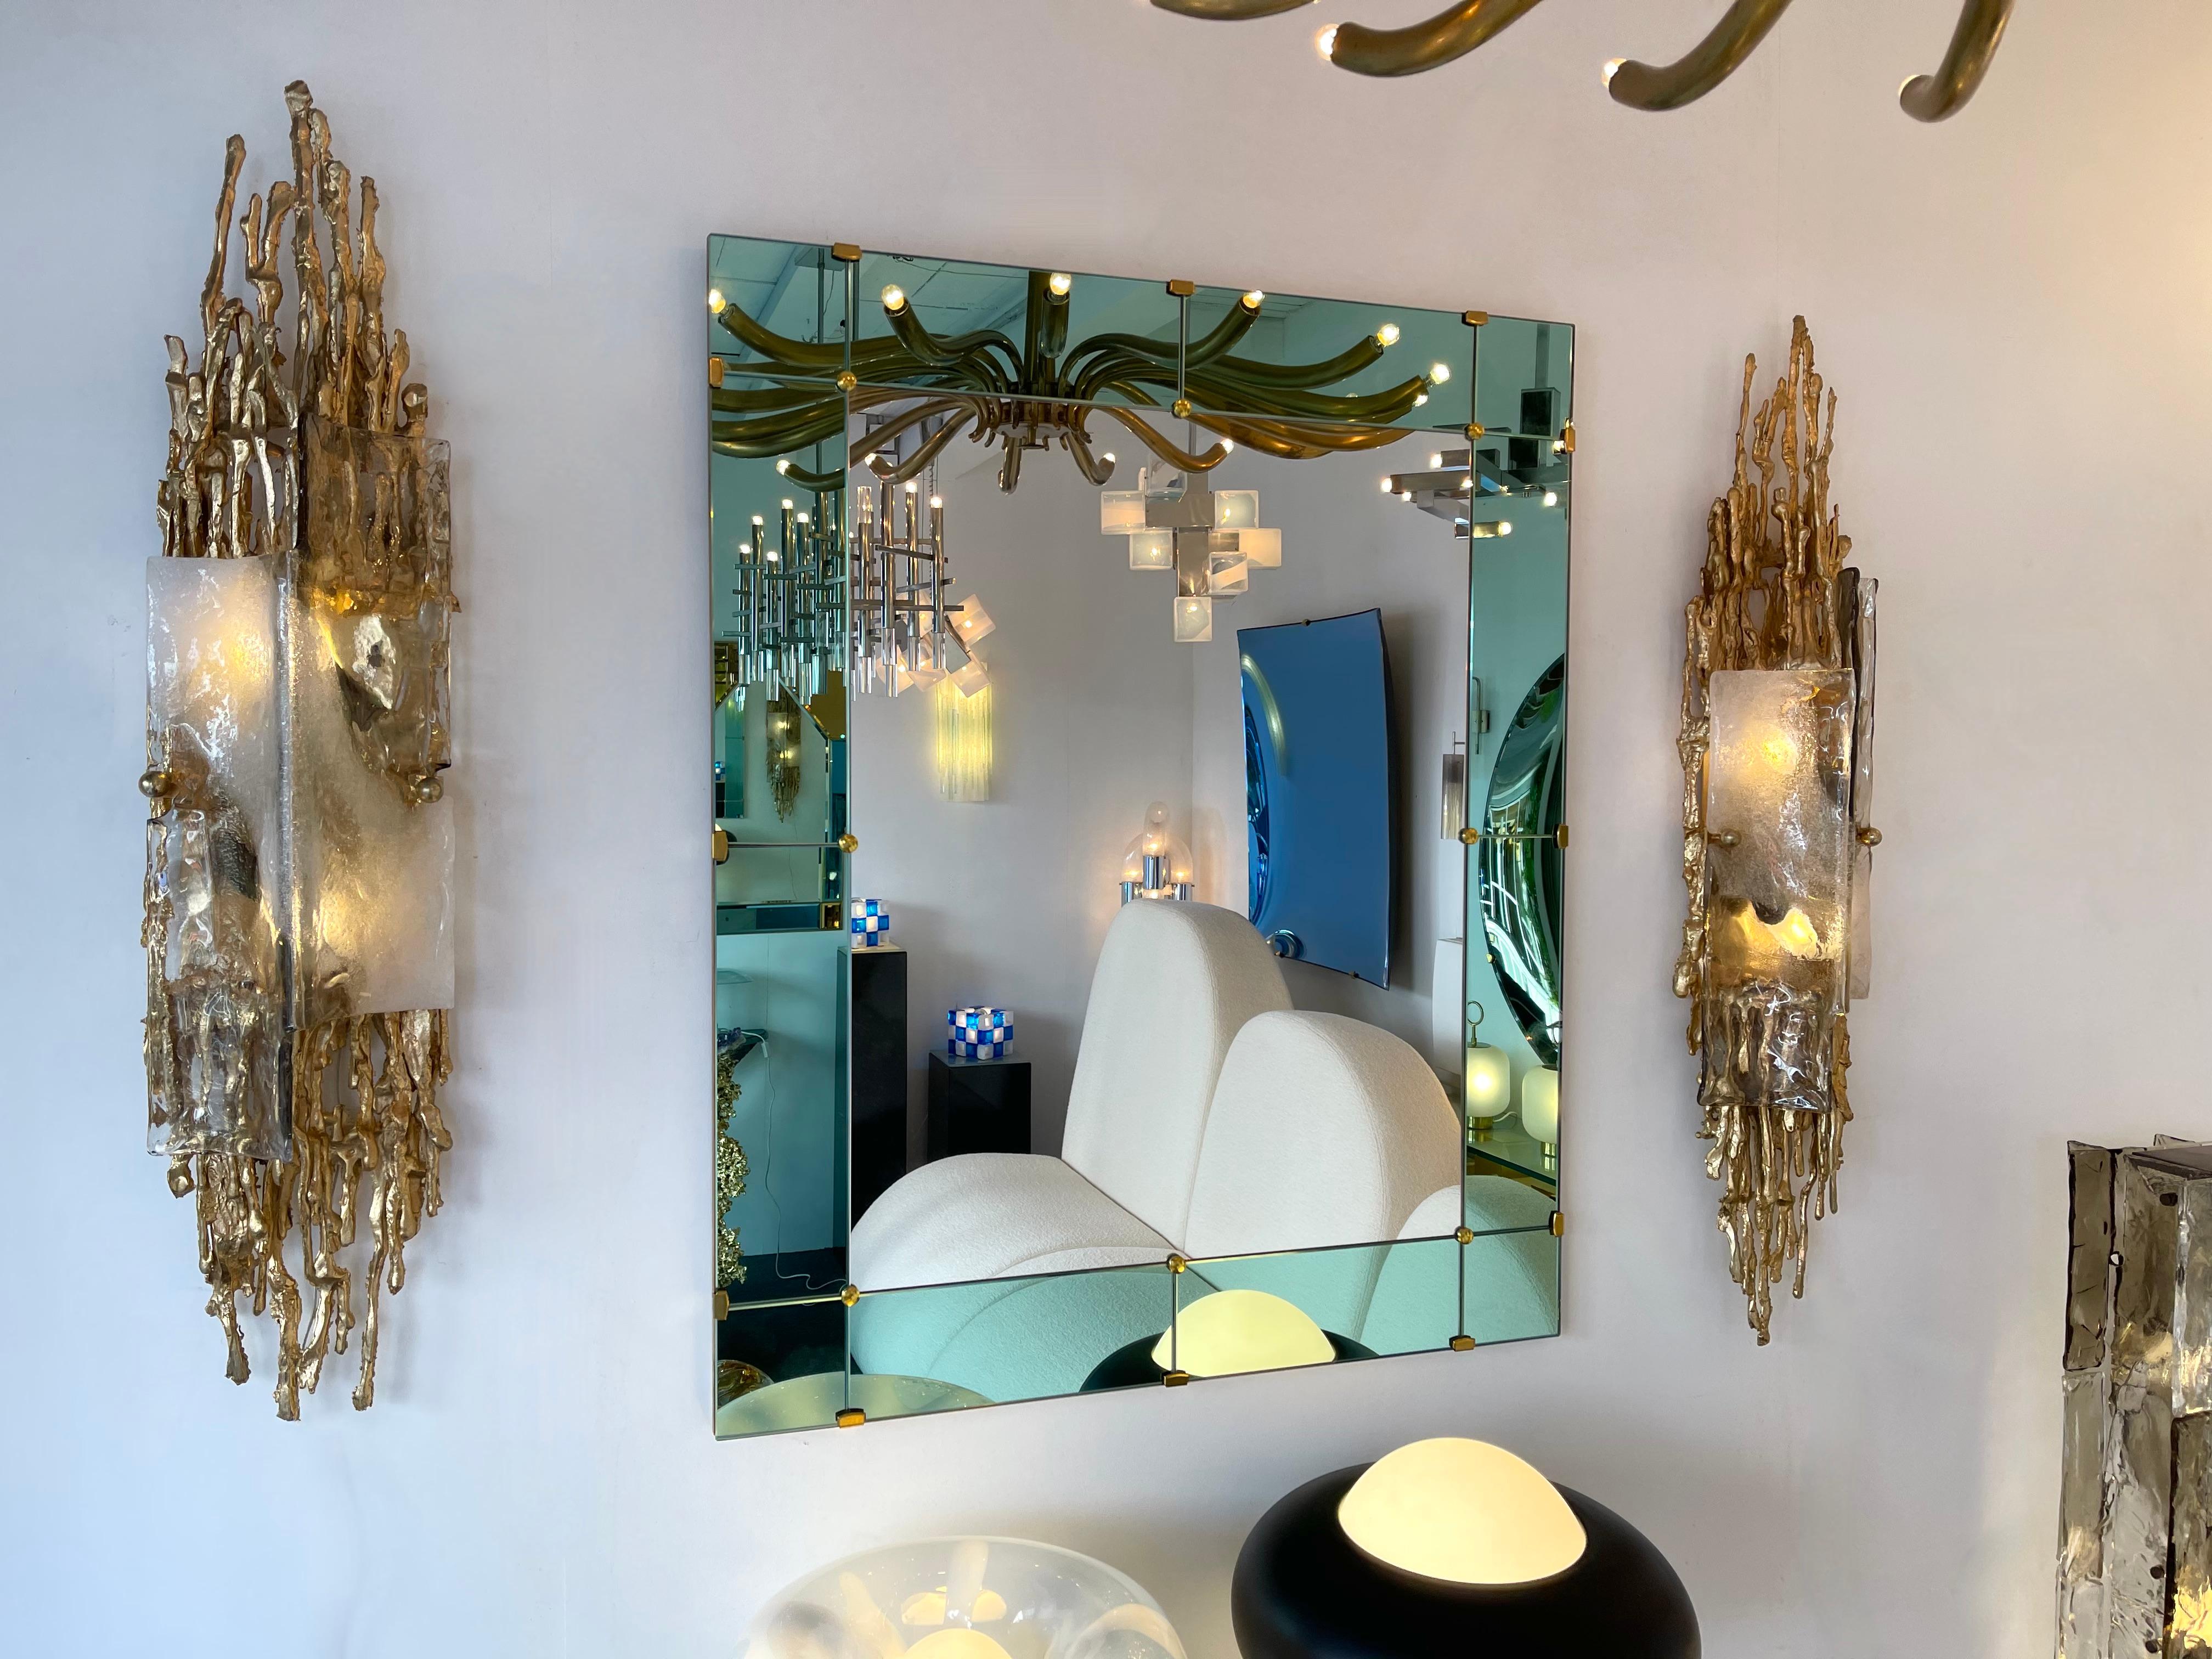 Rare and large pair of gilt bronze wall lamps lights sconces, murano glass diffusor. Unique and singular technique used by Boeltz and called by him 